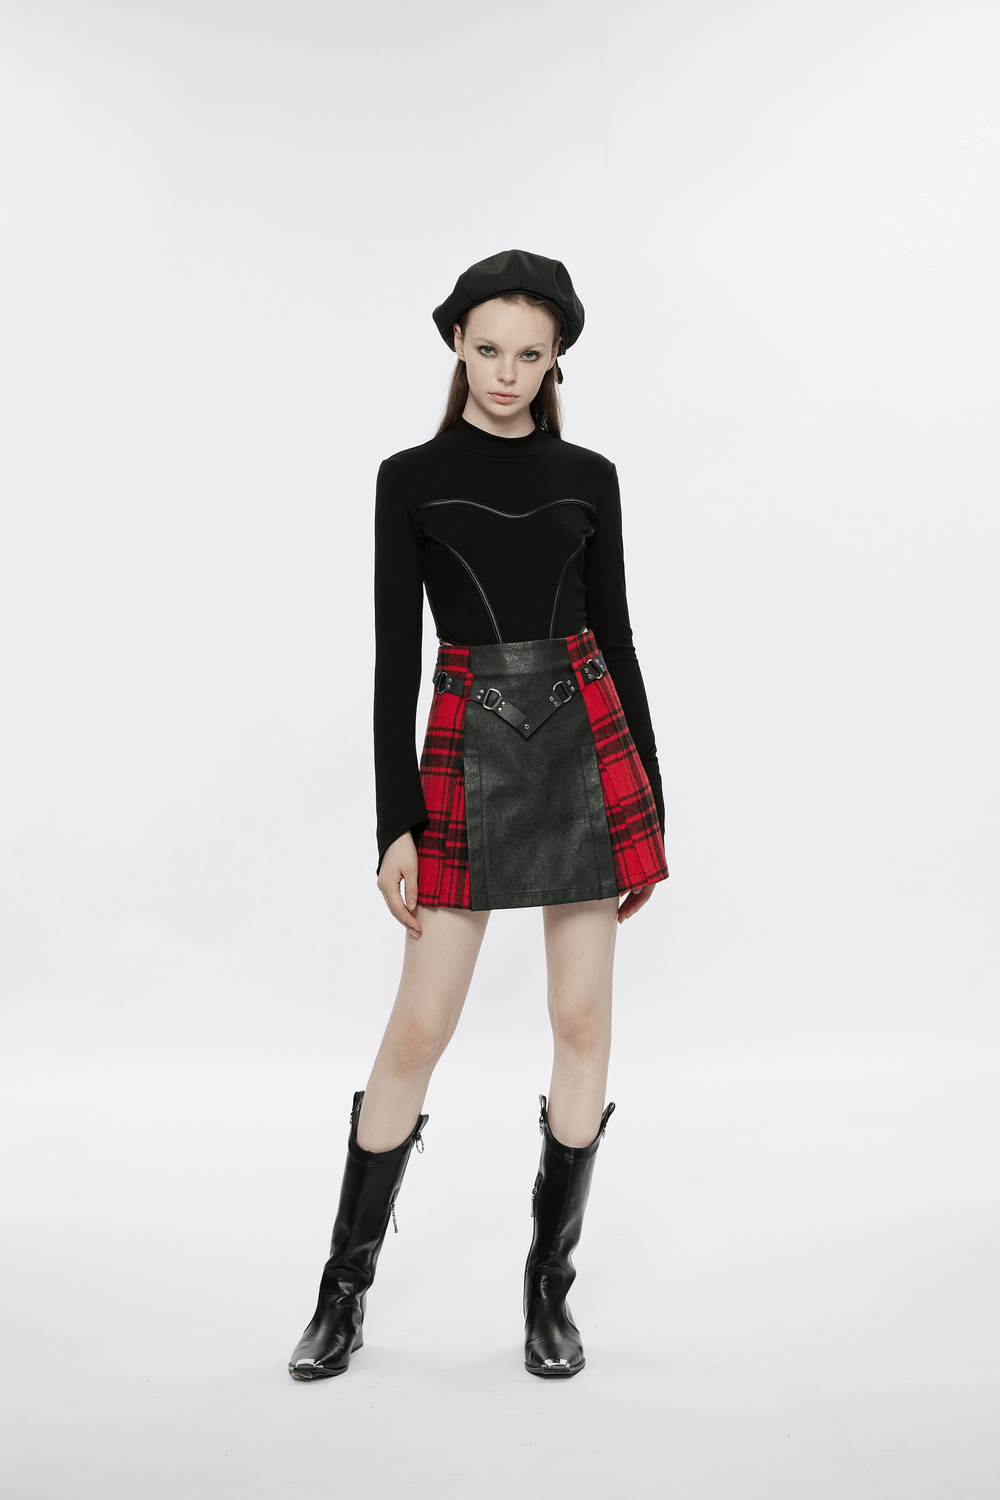 Sleek Bodysuit with Gothic Sleeves and Faux Leather Accents